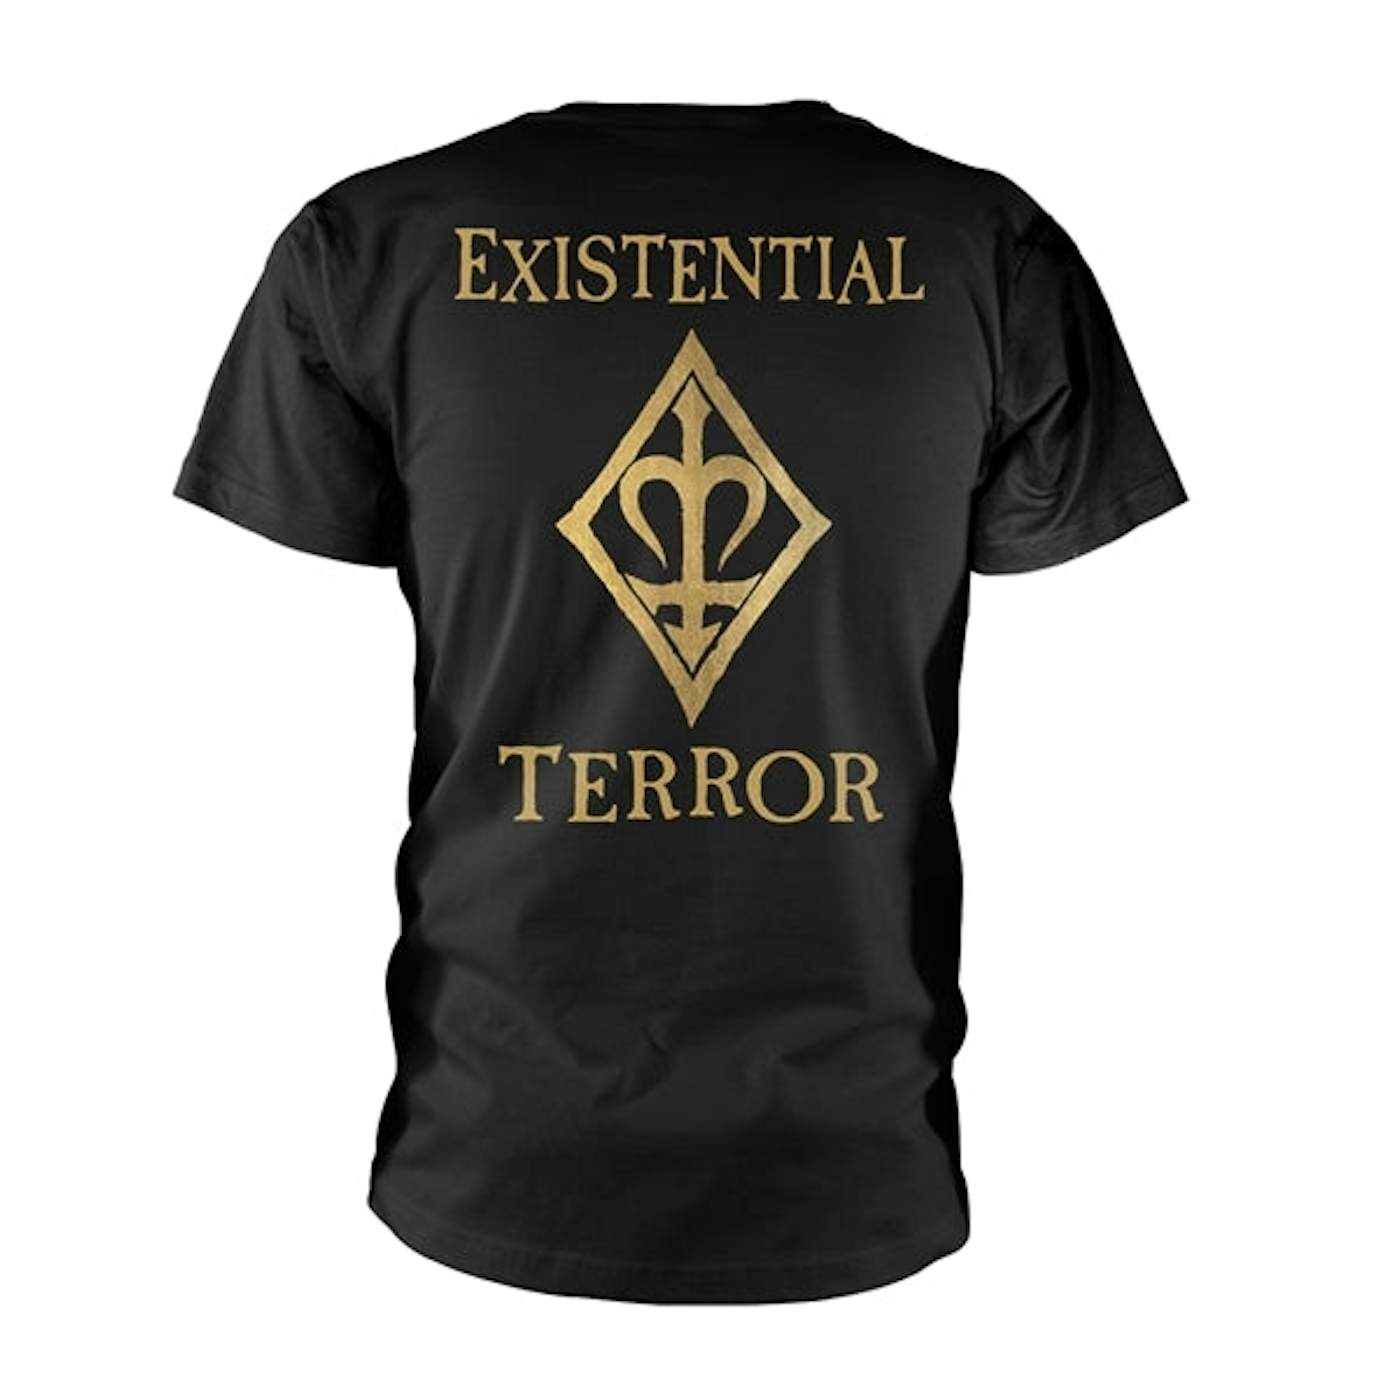 Cradle Of Filth T Shirt - Existence (All Existence)